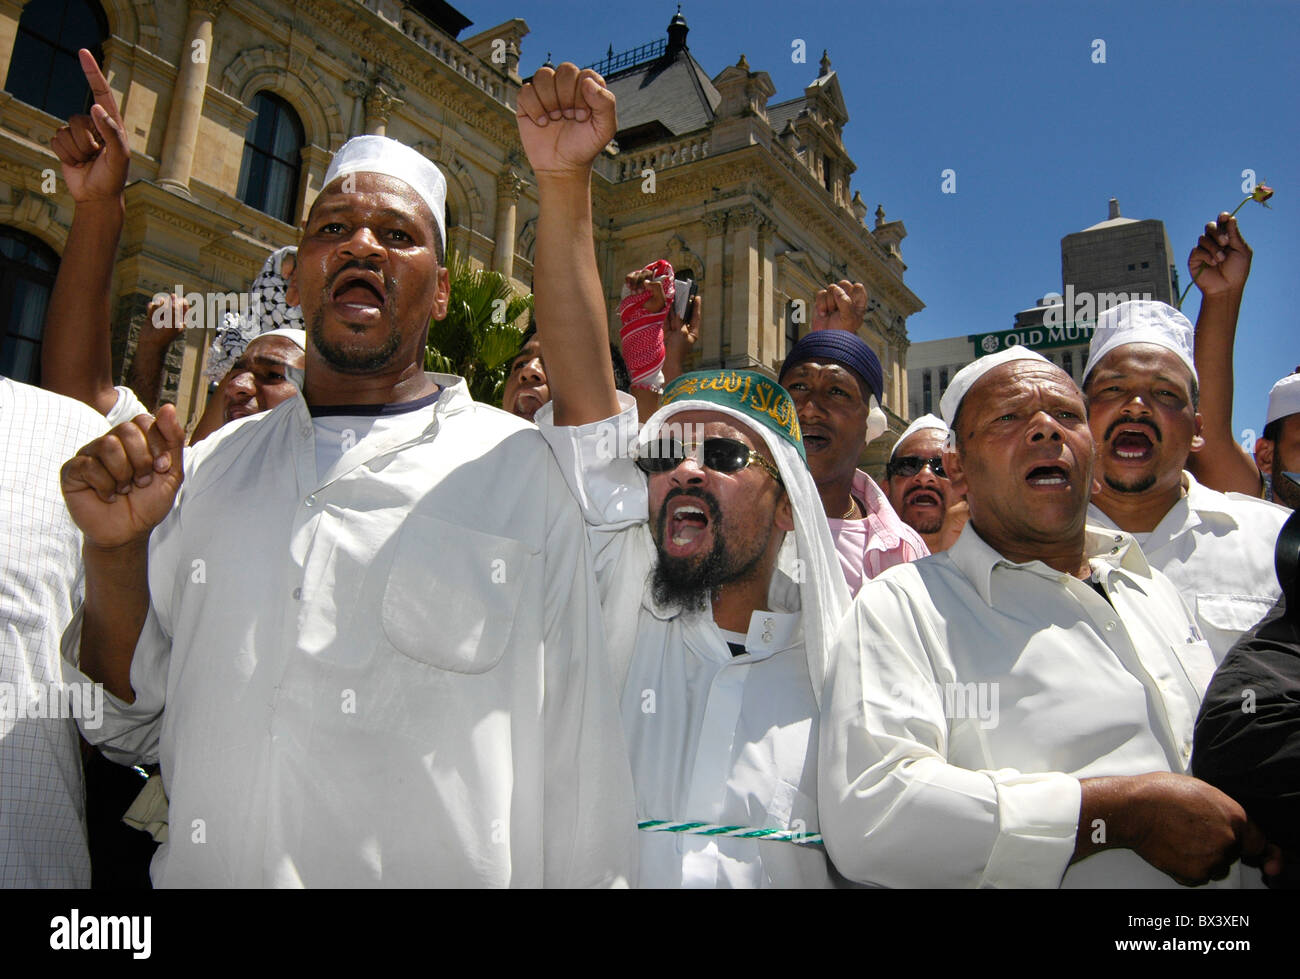 Muslims protest against the Danish Cartoons depicting the prophet Muhammad. Stock Photo